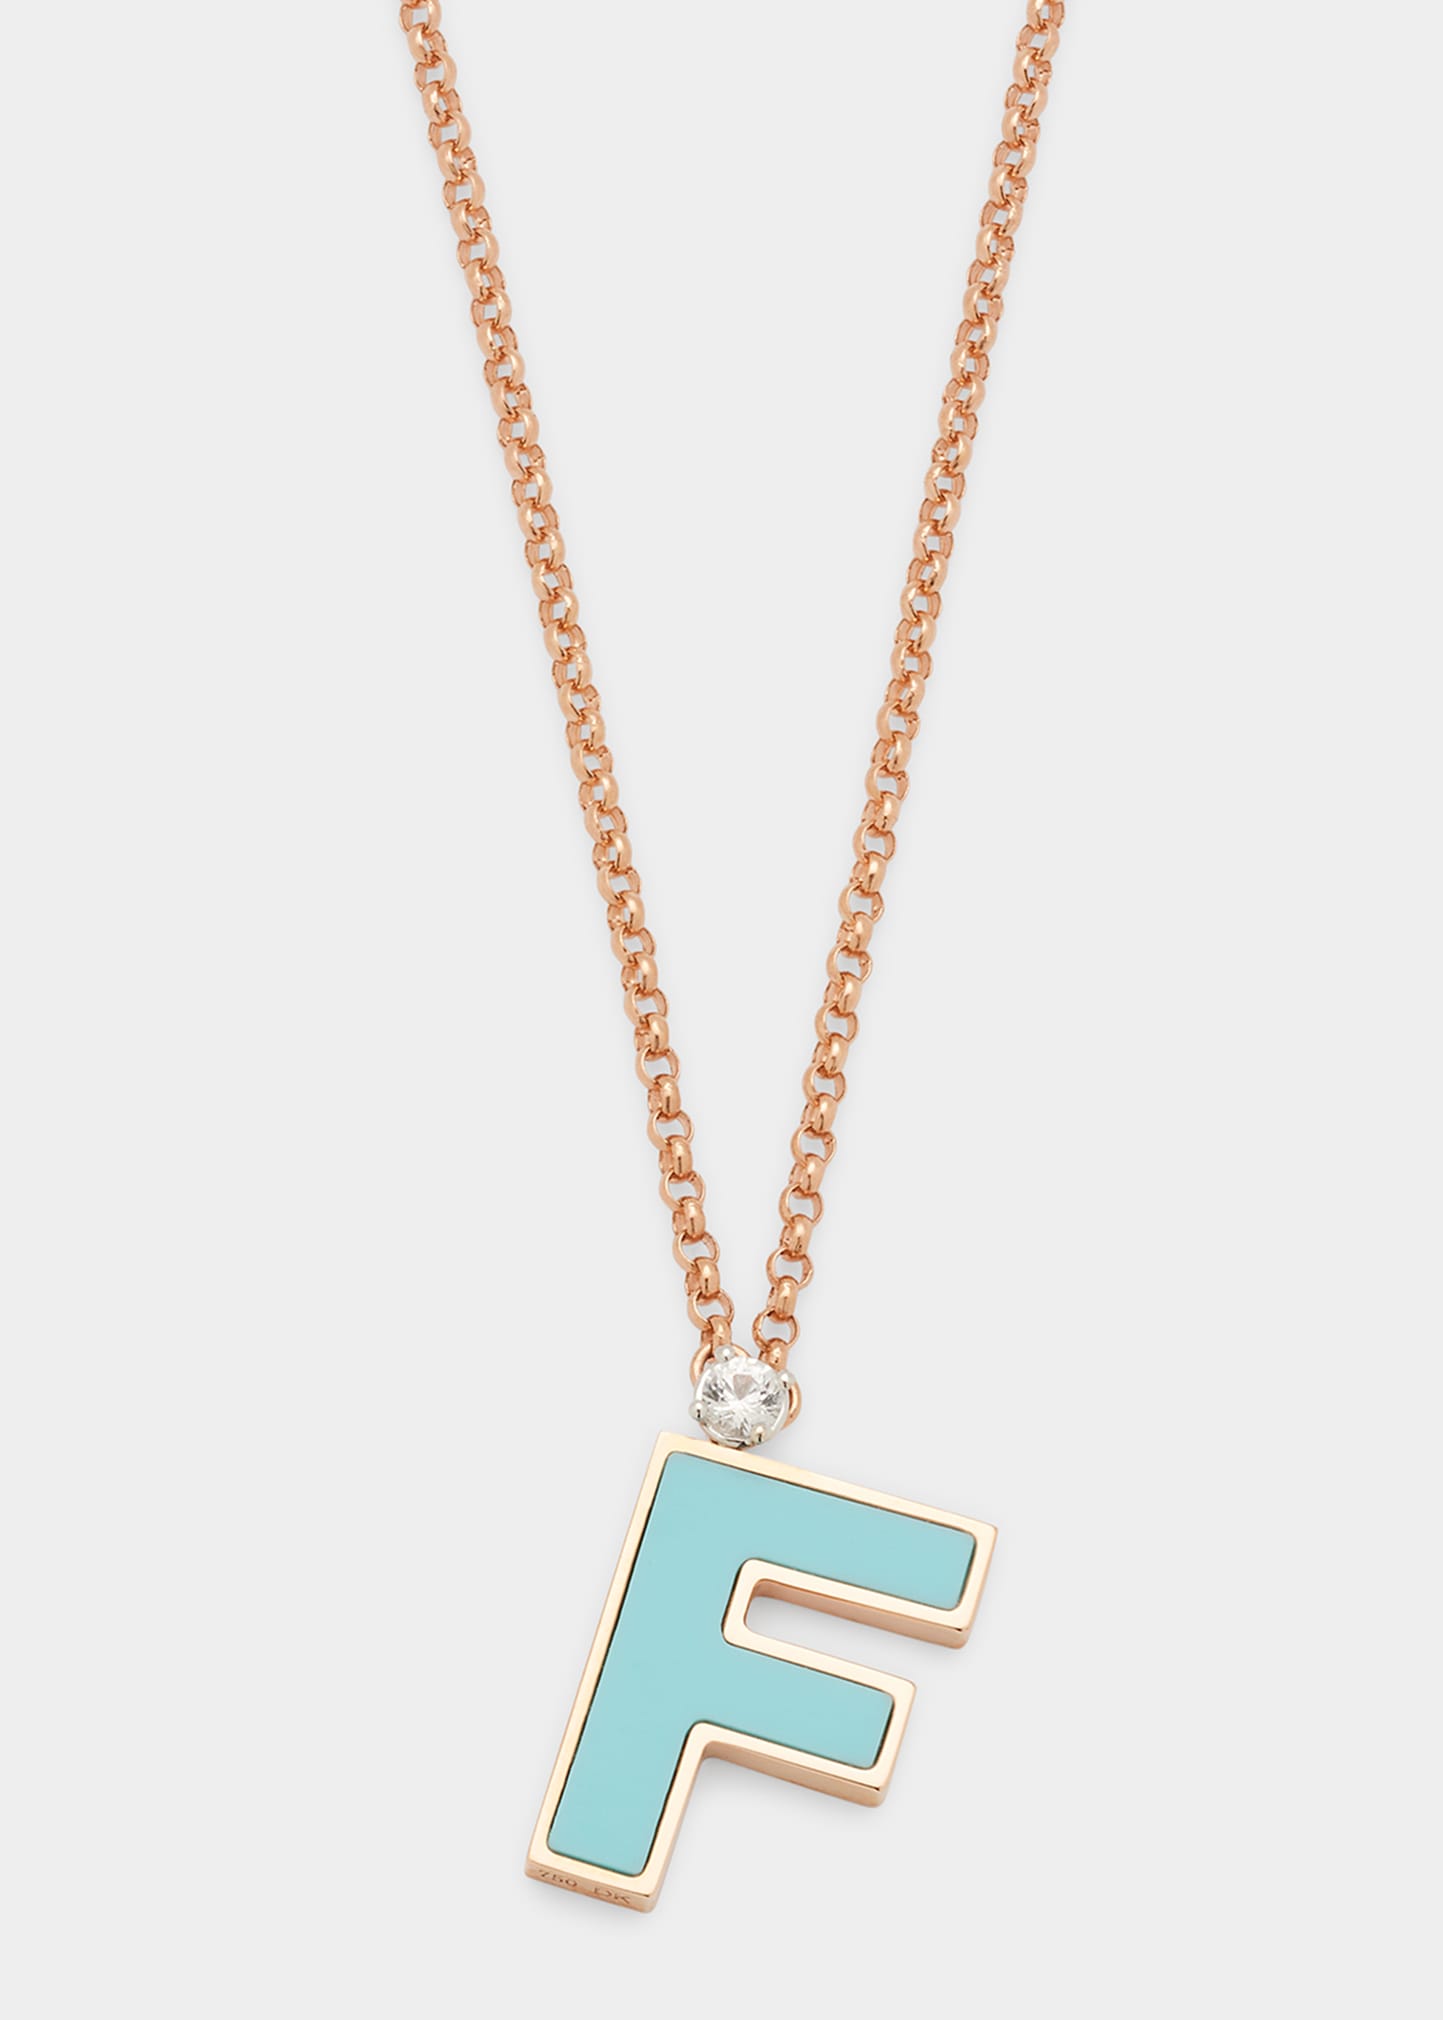 Rose Gold 'F' Letter Charm Necklace with Turquoise and White Sapphire